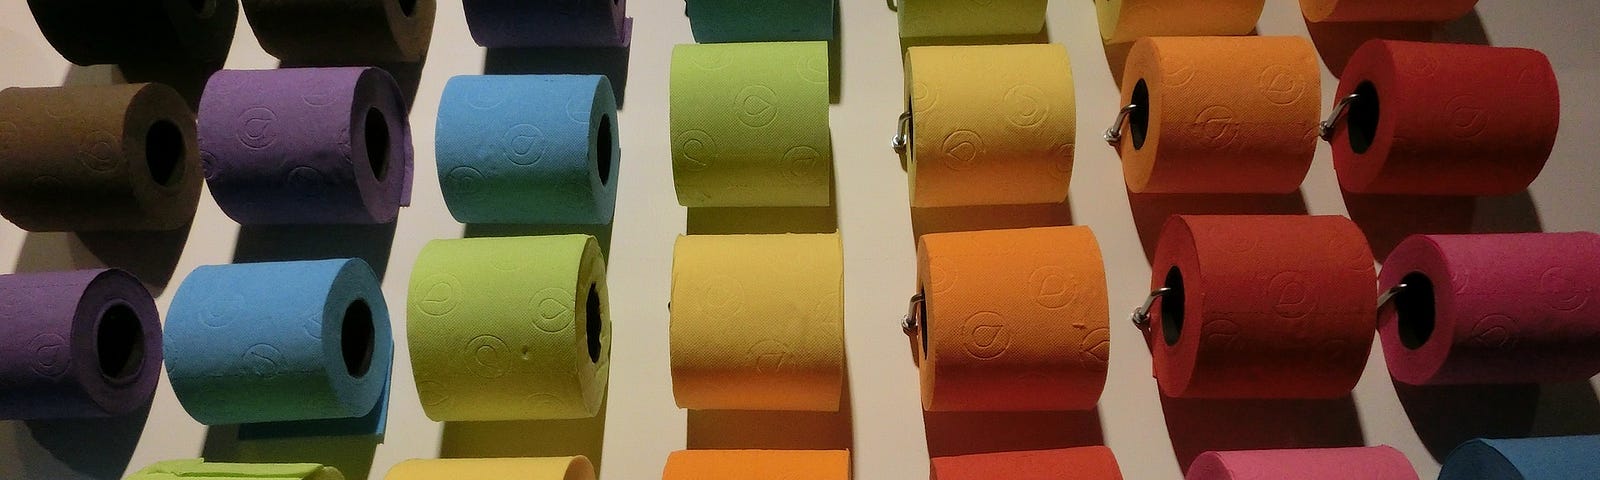 Seven rows of toilet paper in many colors